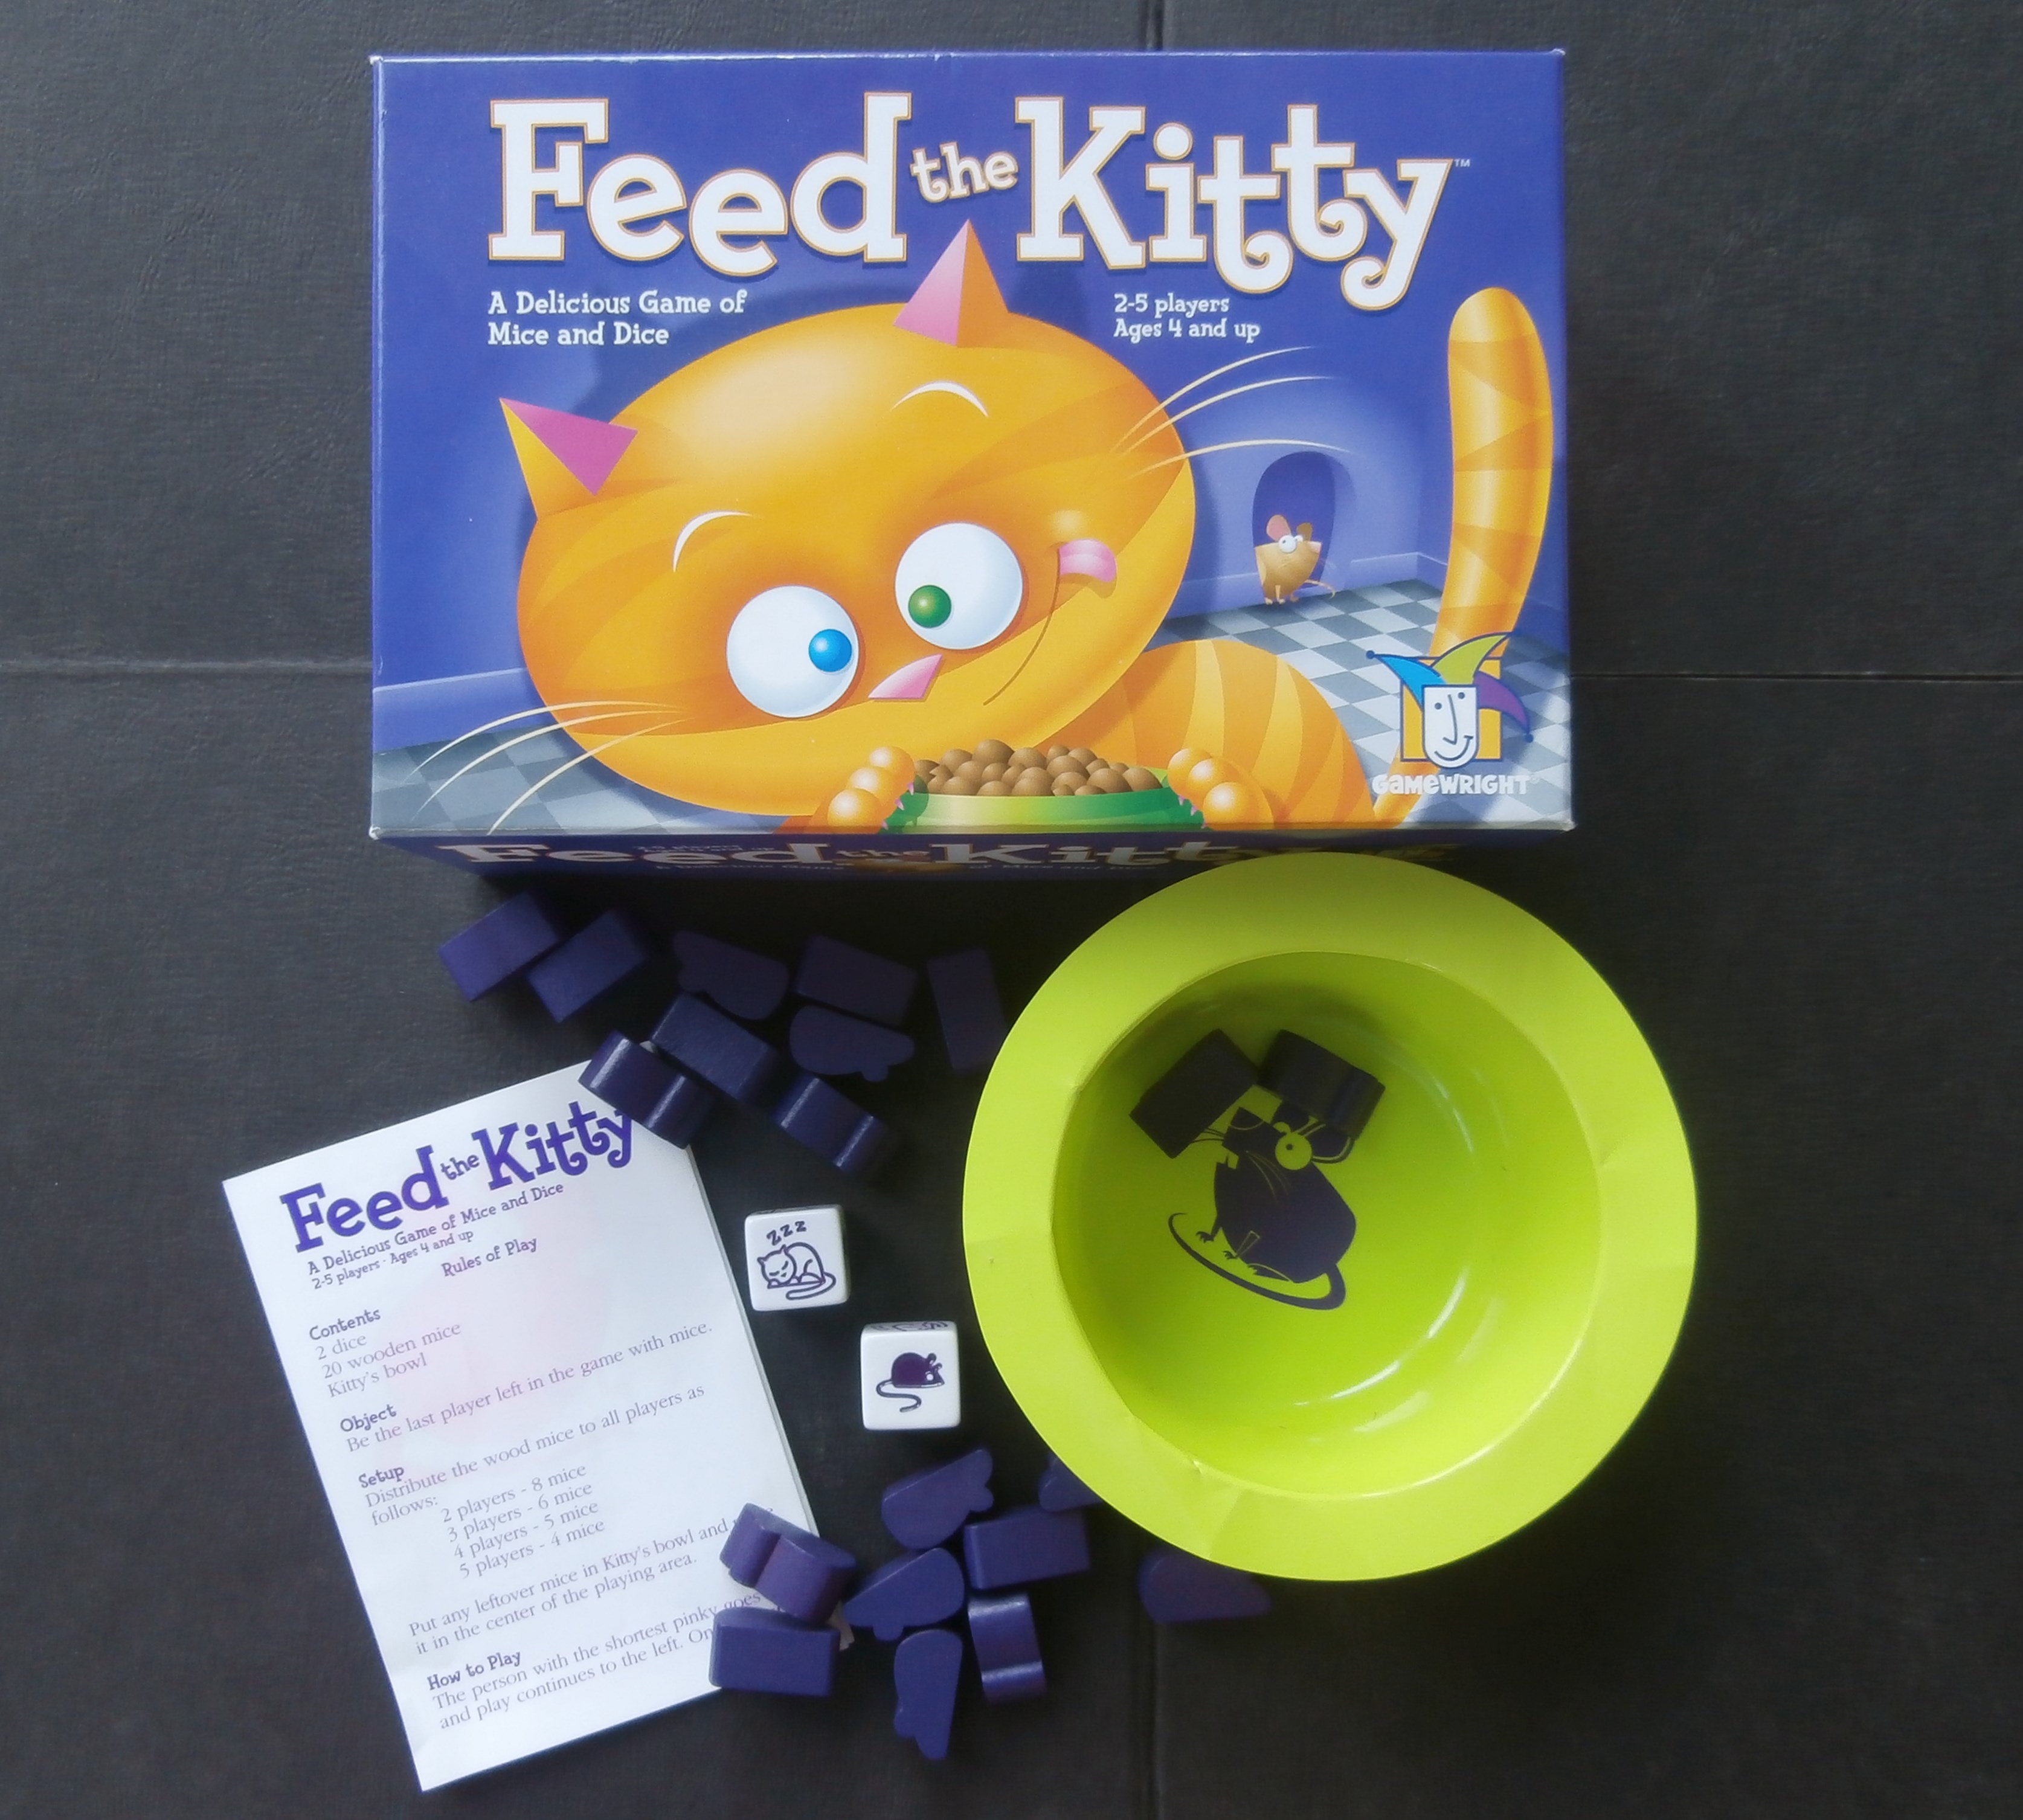 Preschool Game of Feed the Kitty by Gamewright